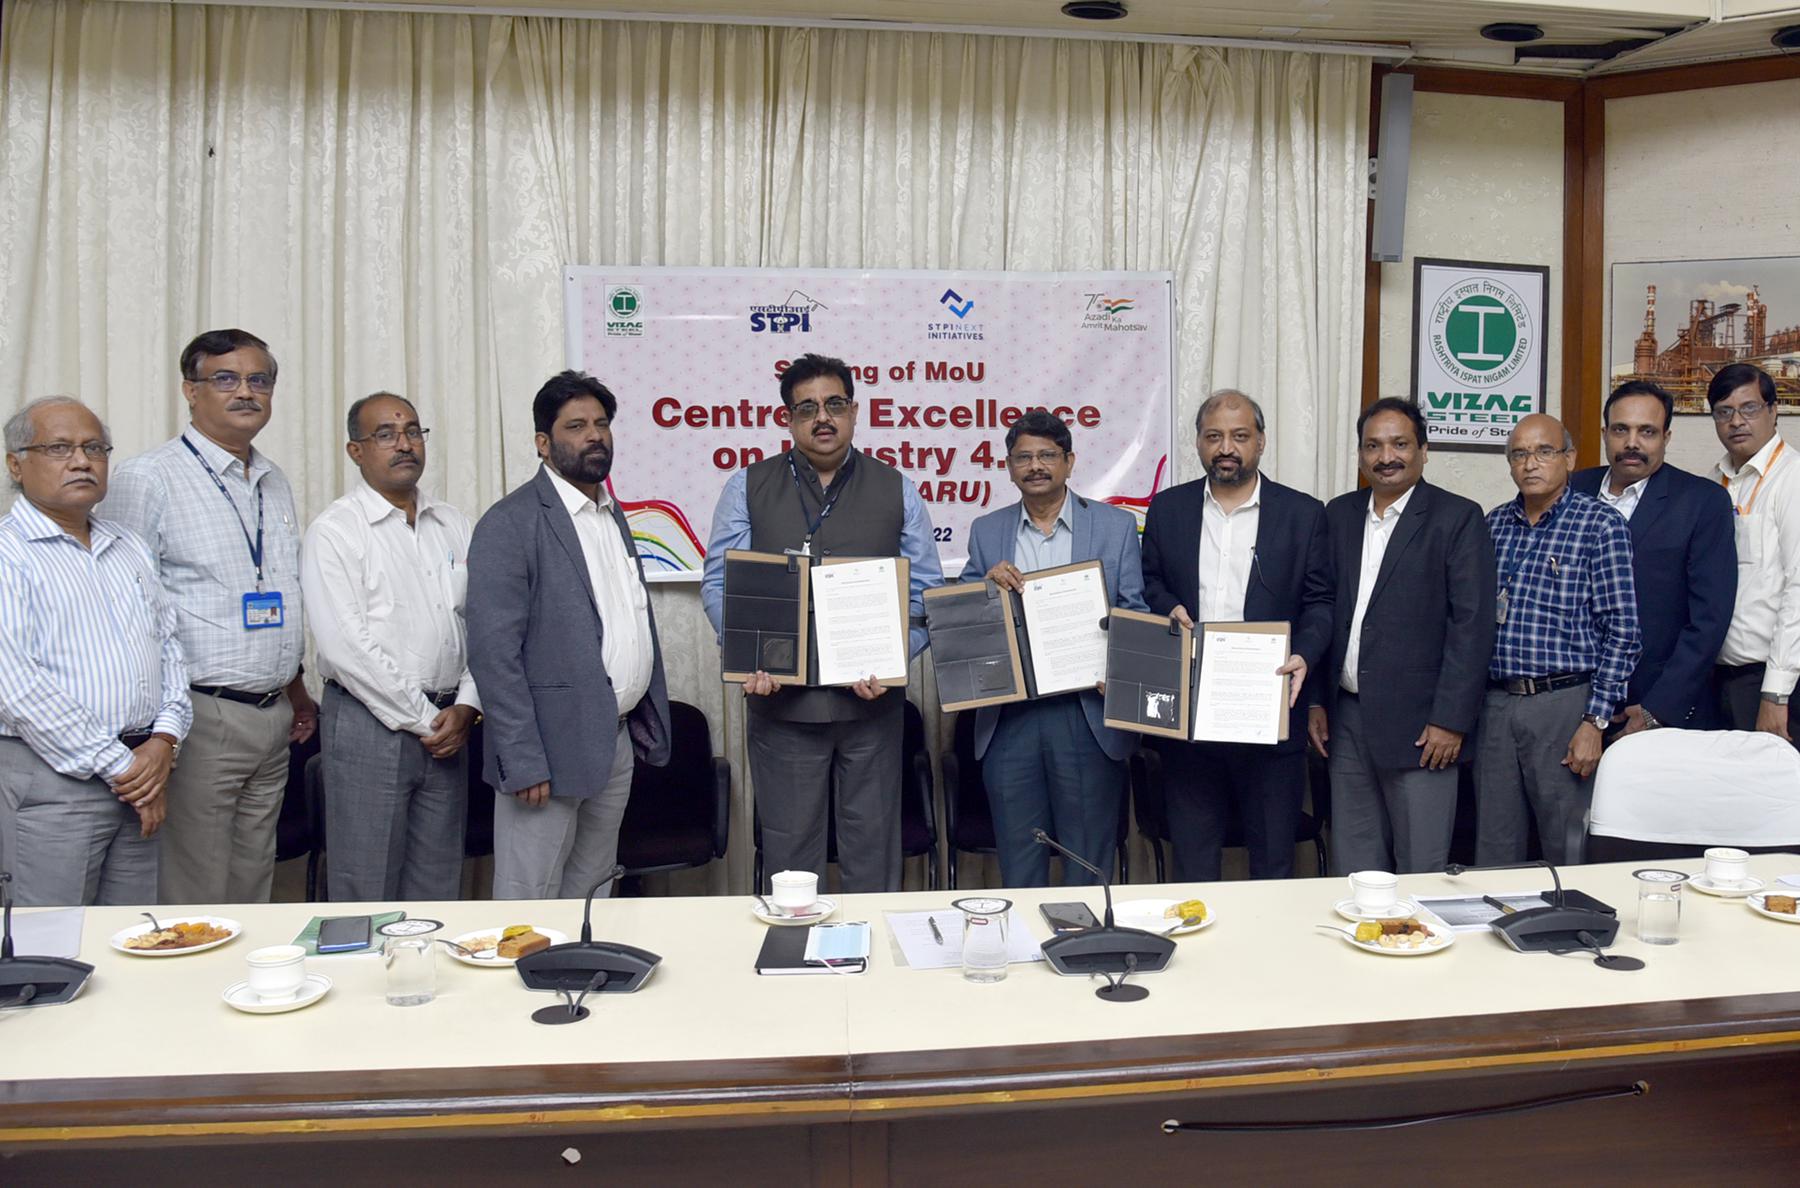 Yet another initiative by RINL towards promotion of Innovation  Startup activities.  - RINL signs MoU with STPI for CoE, Centre of Excellence on Industry 4.0 Kalpataru 